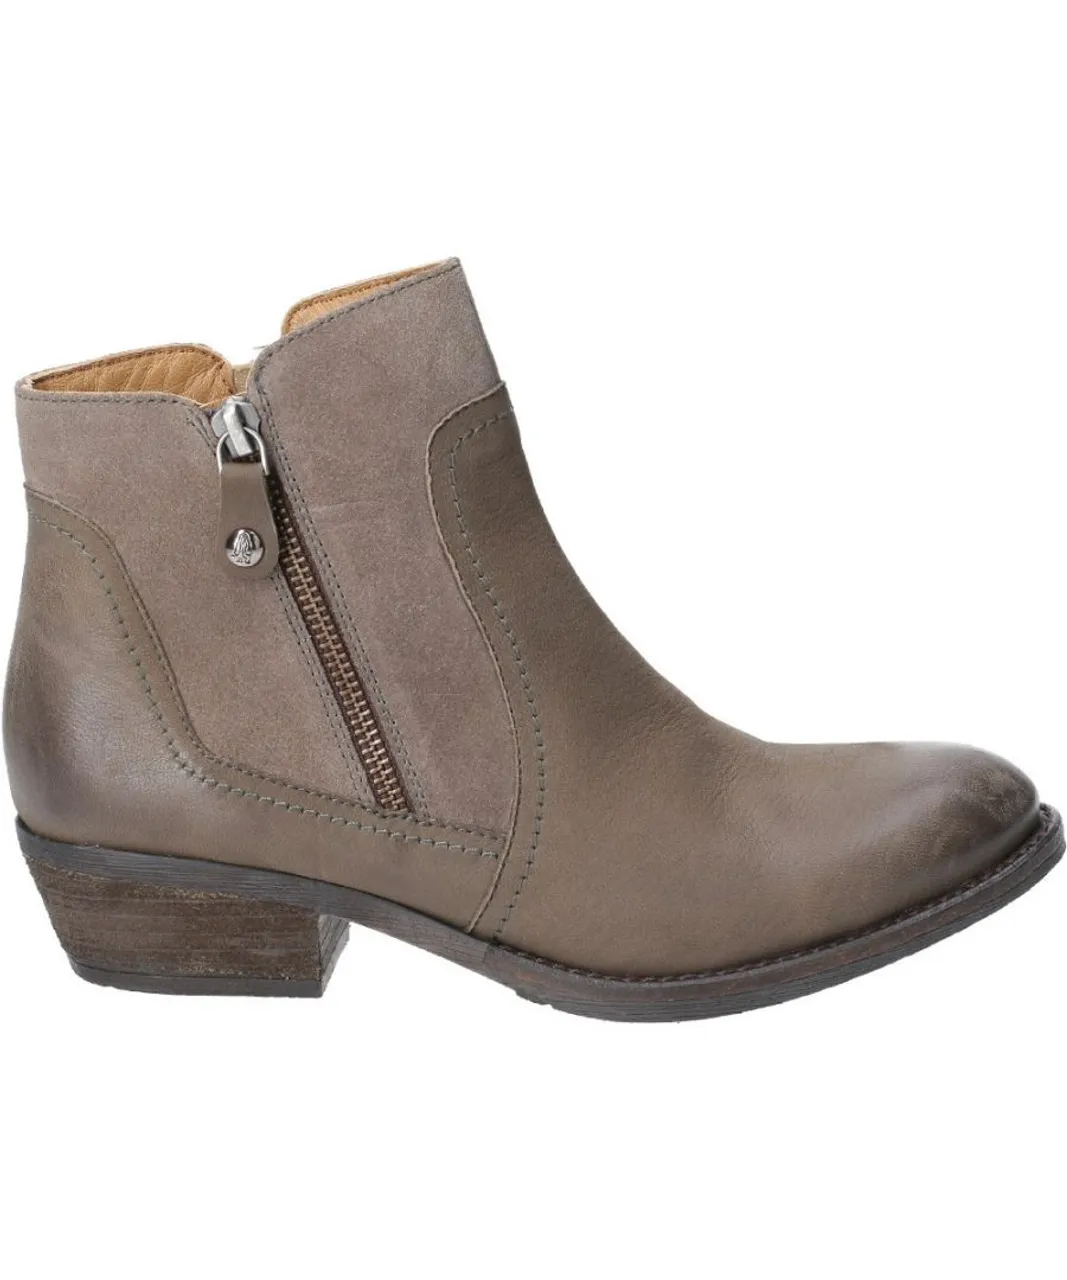 Hush Puppies Womens Isla Zip Up Leather Suede Ankle Boots - Brown